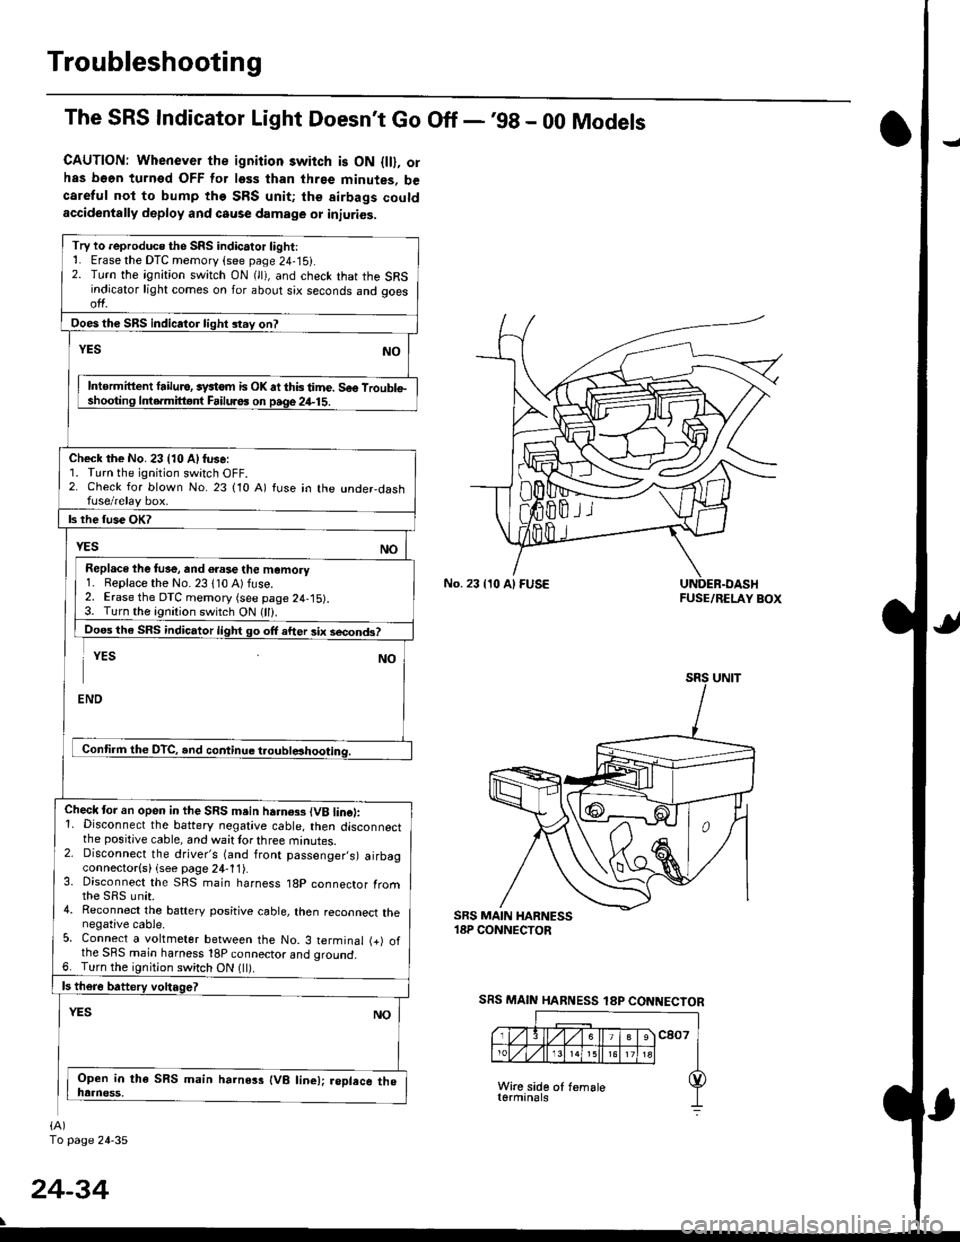 HONDA CIVIC 1996 6.G Owners Guide Troubleshooting
The SRS Indicator Light Doesnt Go Off -98 - 00 Models
CAUTION: Whenever the ignition switch is ON {ll}, orhas b66n turned OFF for less than three minutes, becareful not to bump the S